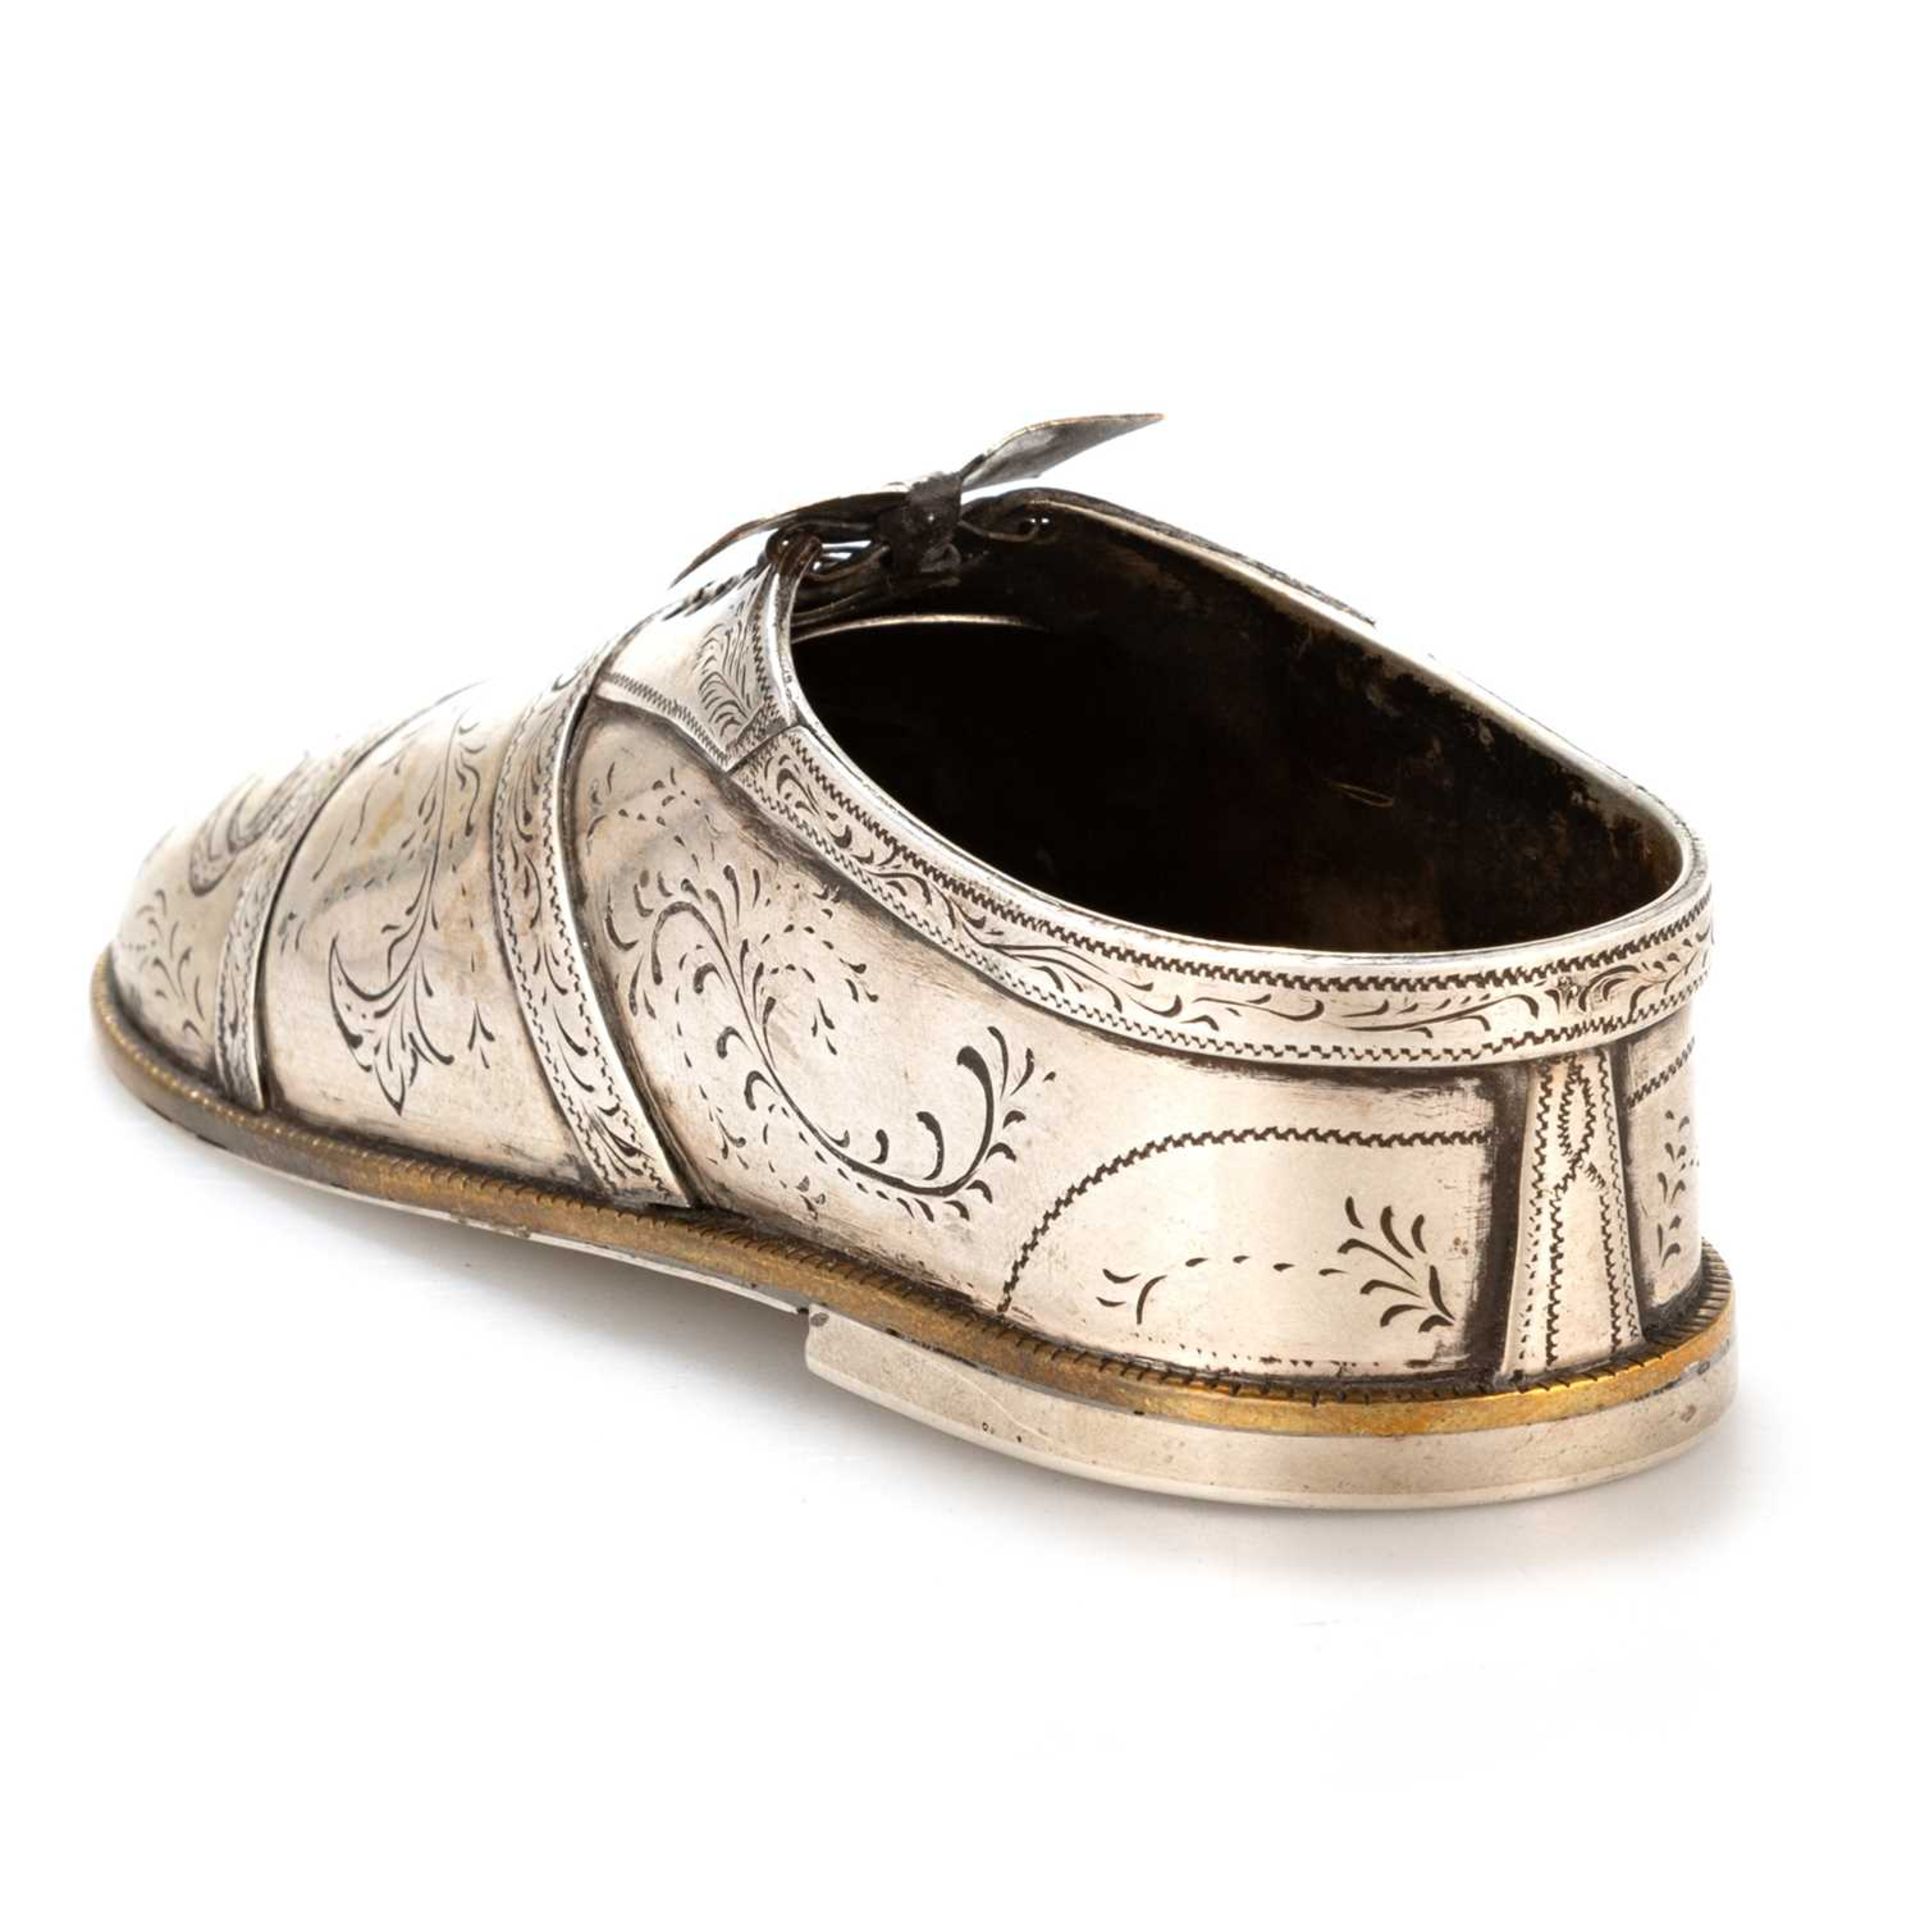 A HEAVY AND RARE RUSSIAN SILVER MODEL OF A SHOE - Image 2 of 3